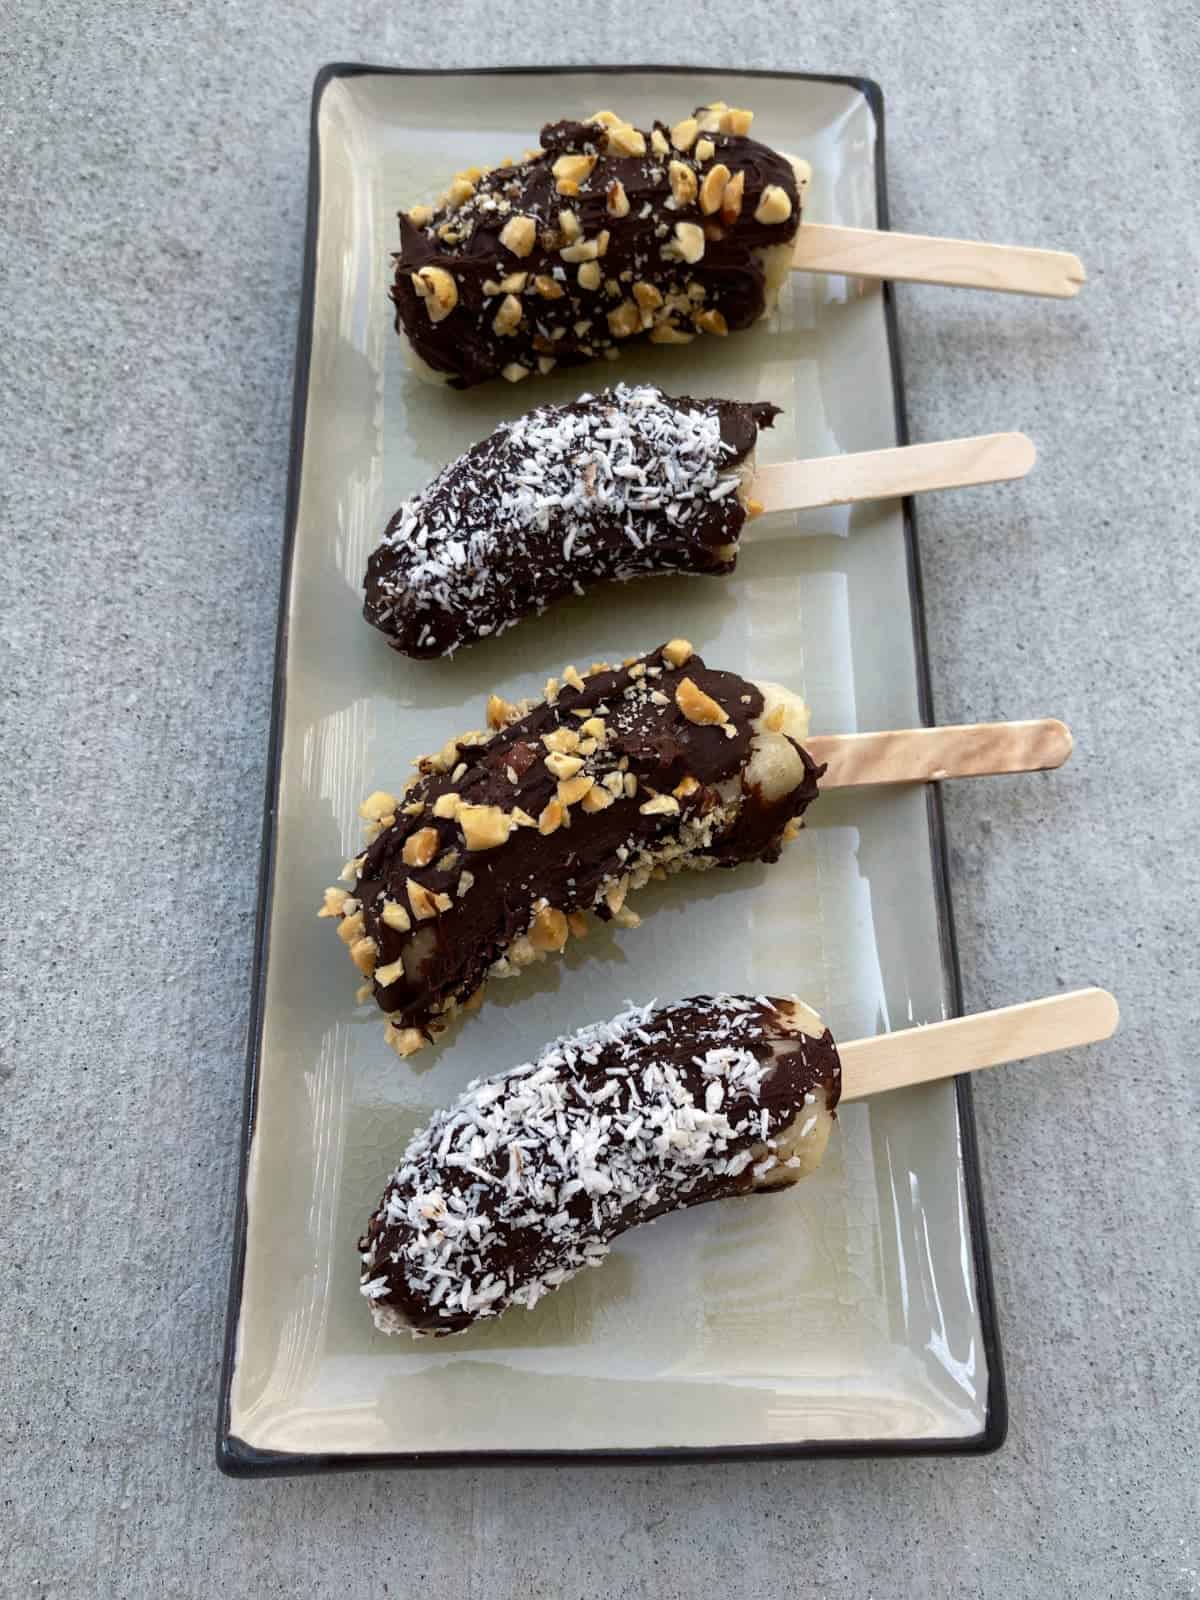 Frozen Chocolate-Dipped Bananas sprinkled with shredded coconut and chopped peanuts.